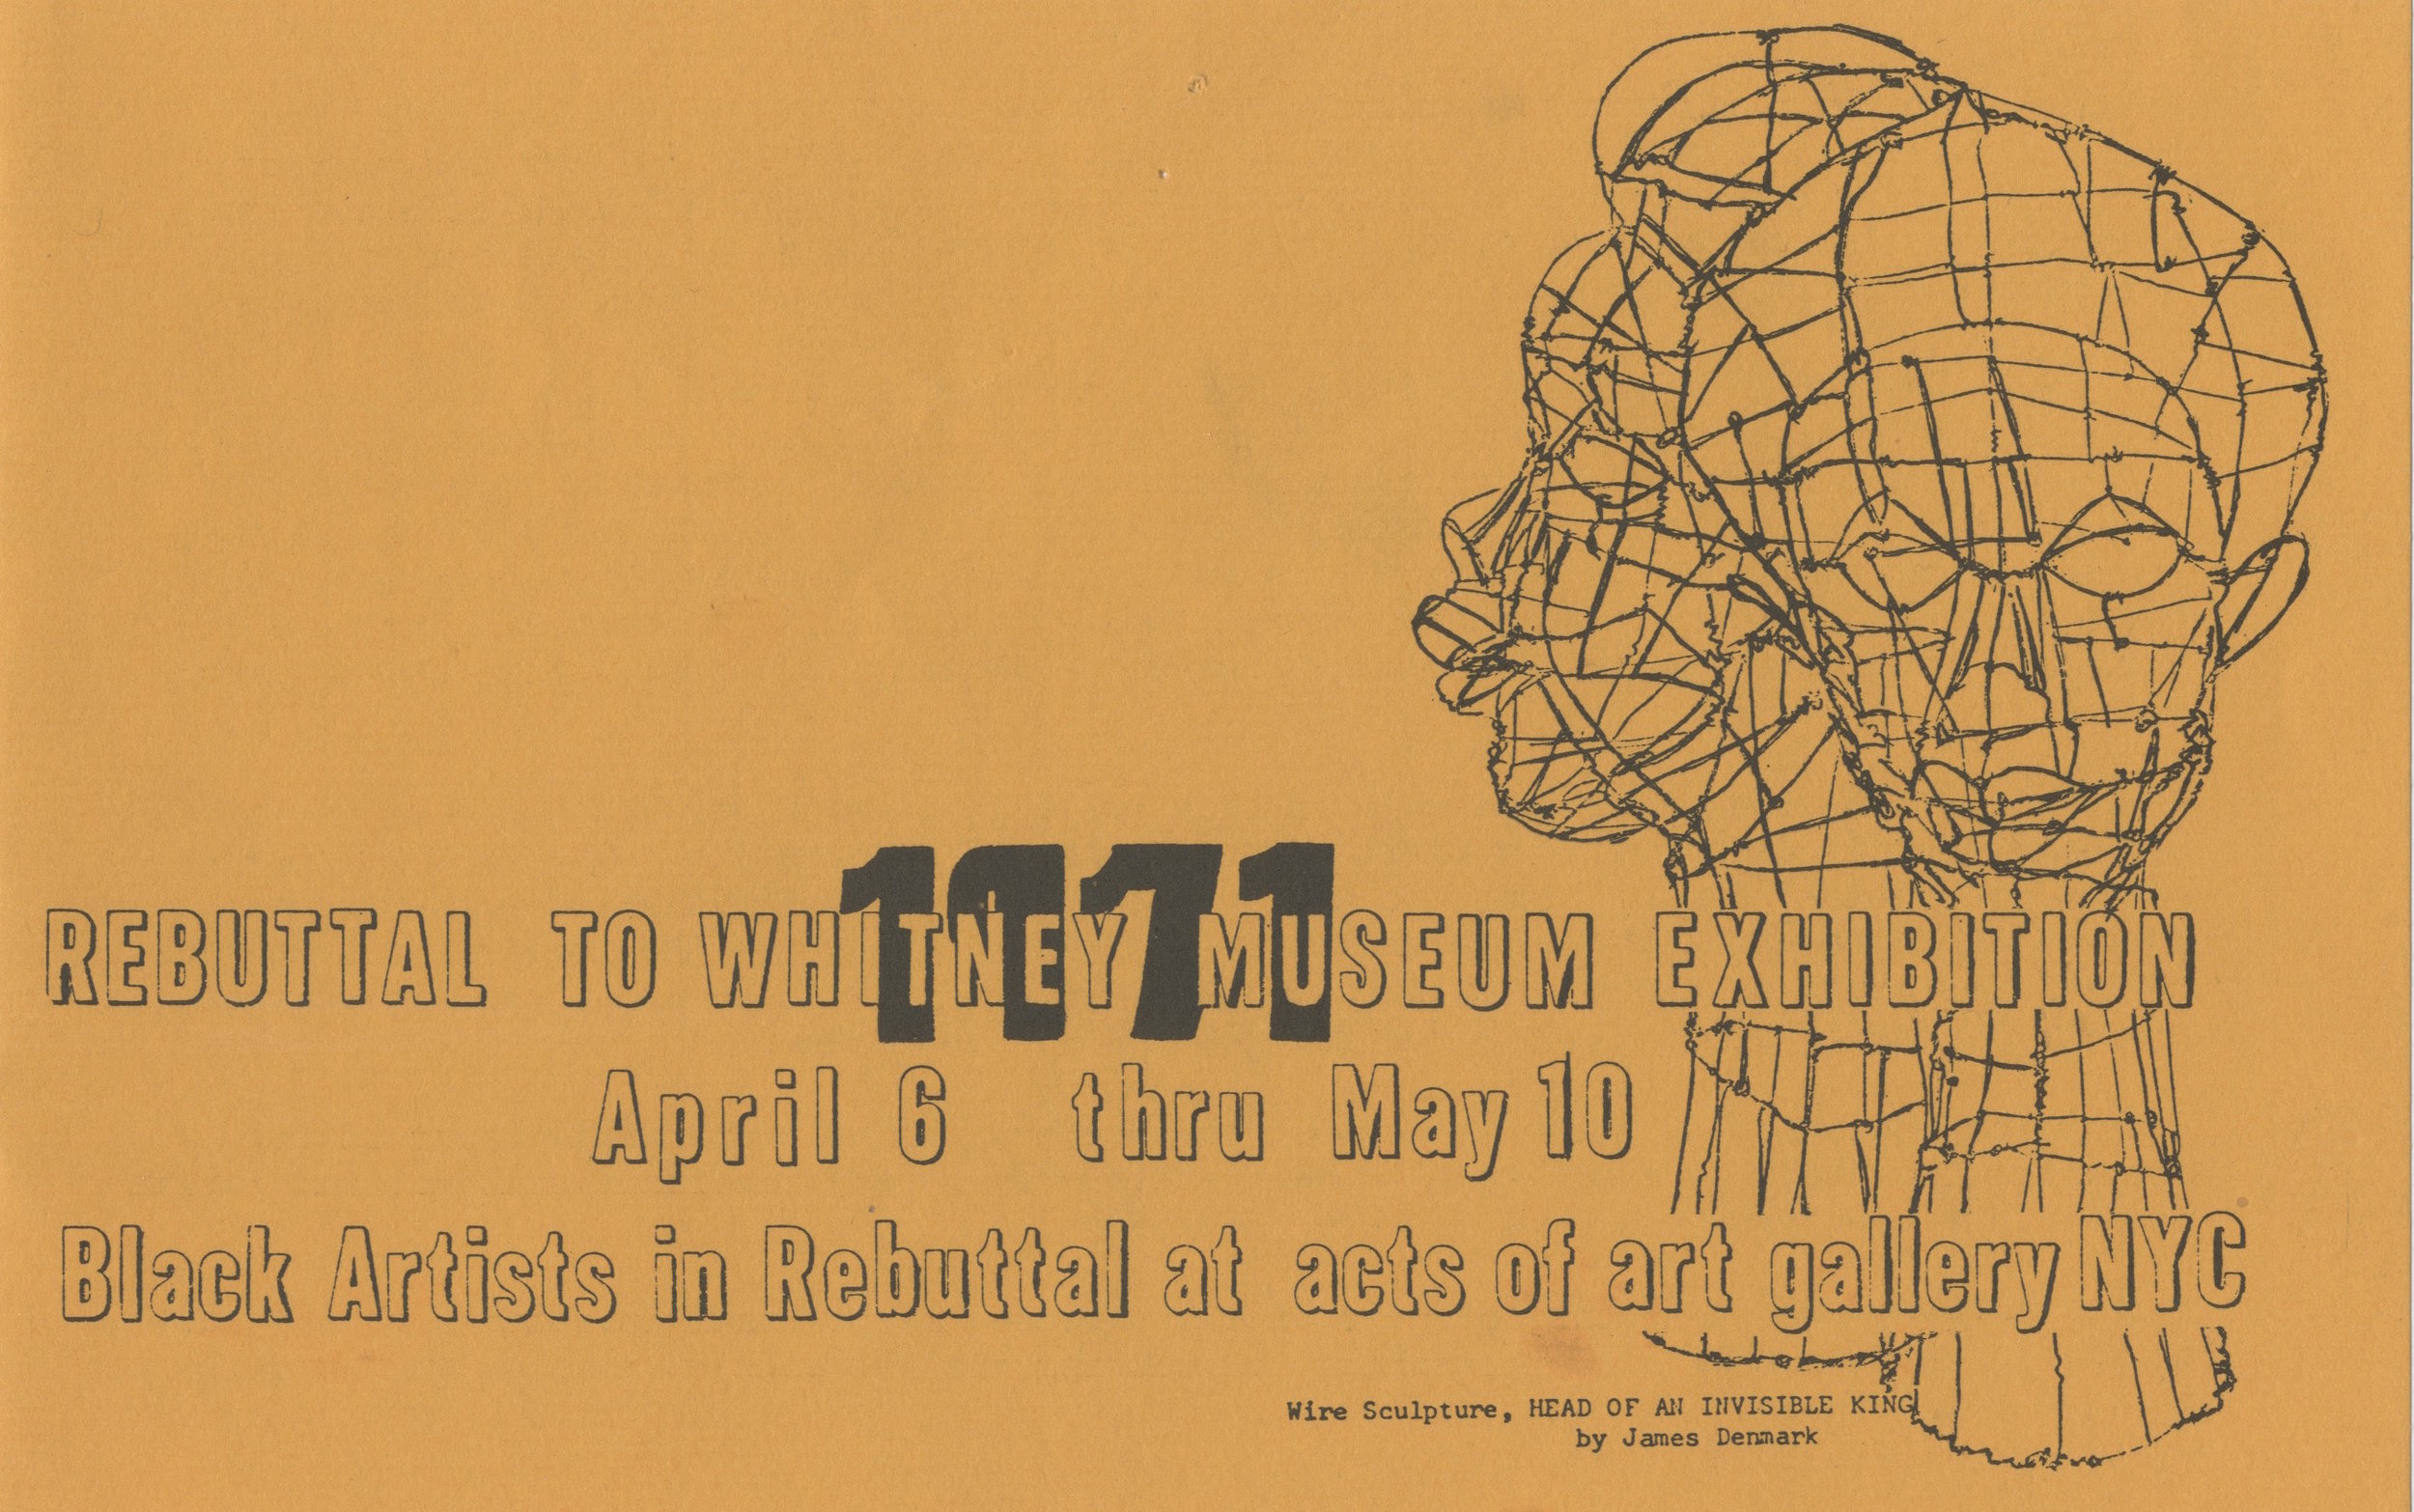  Invitation to  Rebuttal to Whitney Museum Exhibition , 1971 Courtesy of Crows Nest Gallery and Studio/Archives of Vivian E. Browne 